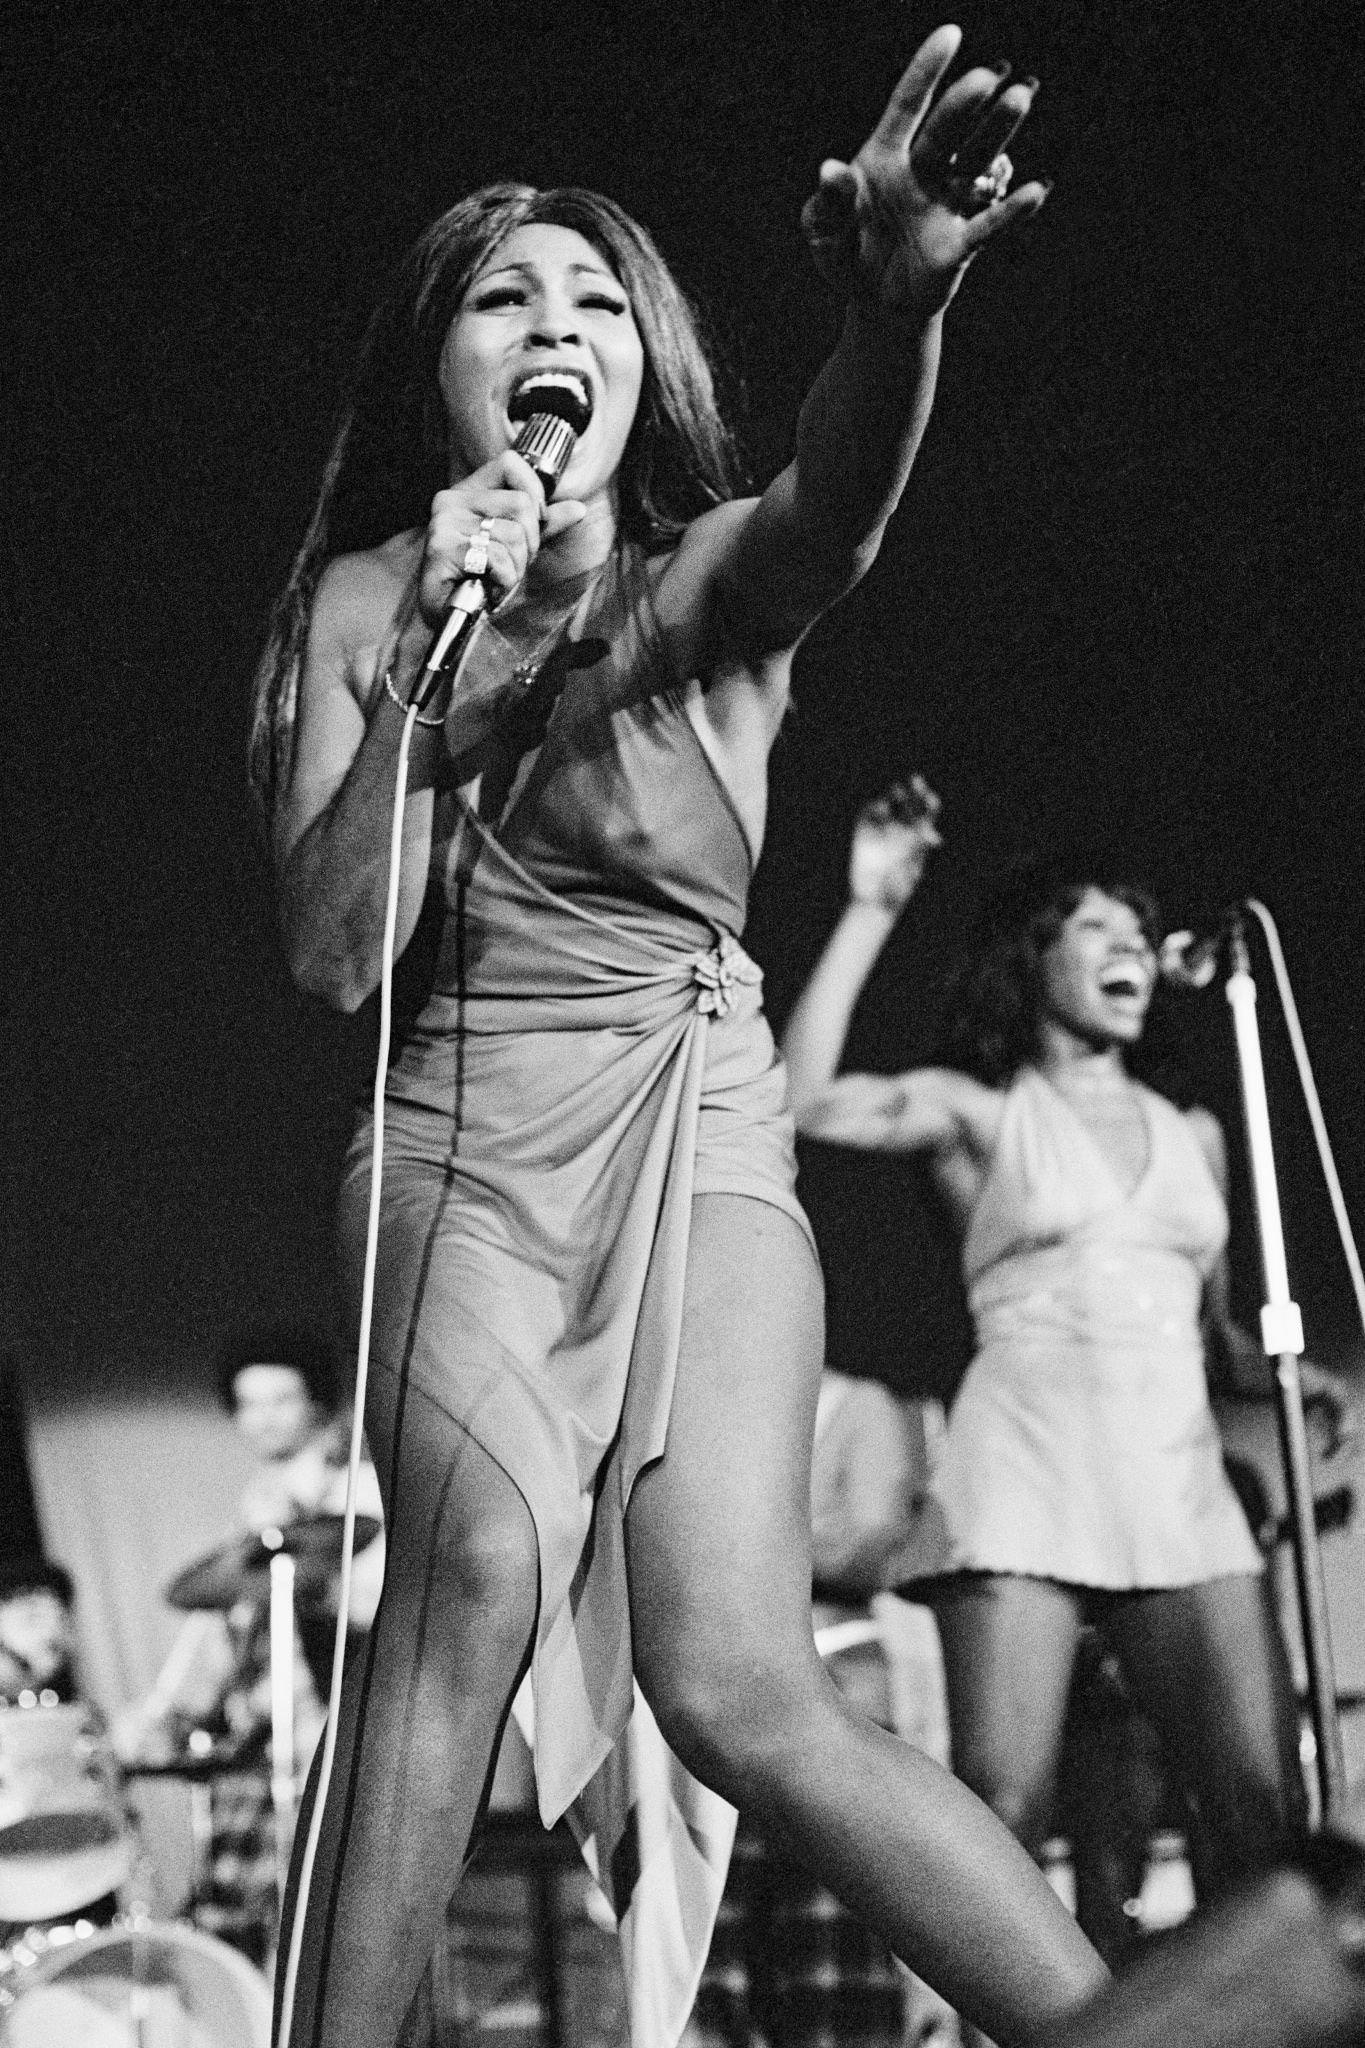 Tina Turner's Legs: The Physical Attribute That Helped Make Her a Music ...